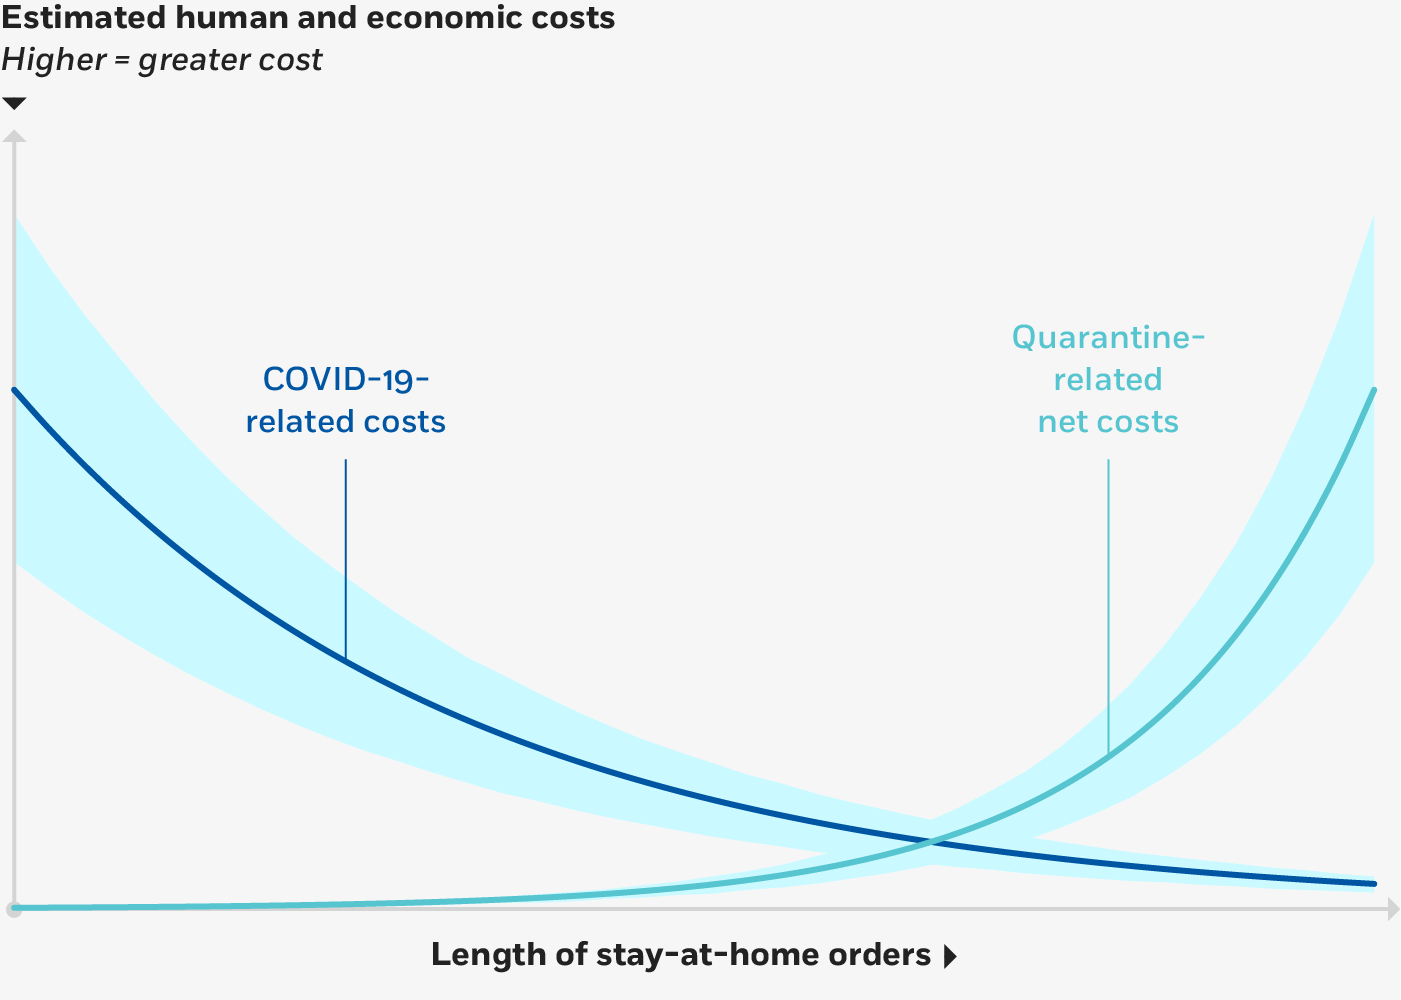 A line diagram showing rising estimated human and economic costs on the y-axis and increasing length of stay-at-home orders on the x-axis. Trend curves show COVID-19-related costs falling over time, while quarantine-related gross costs and net costs rise over time.